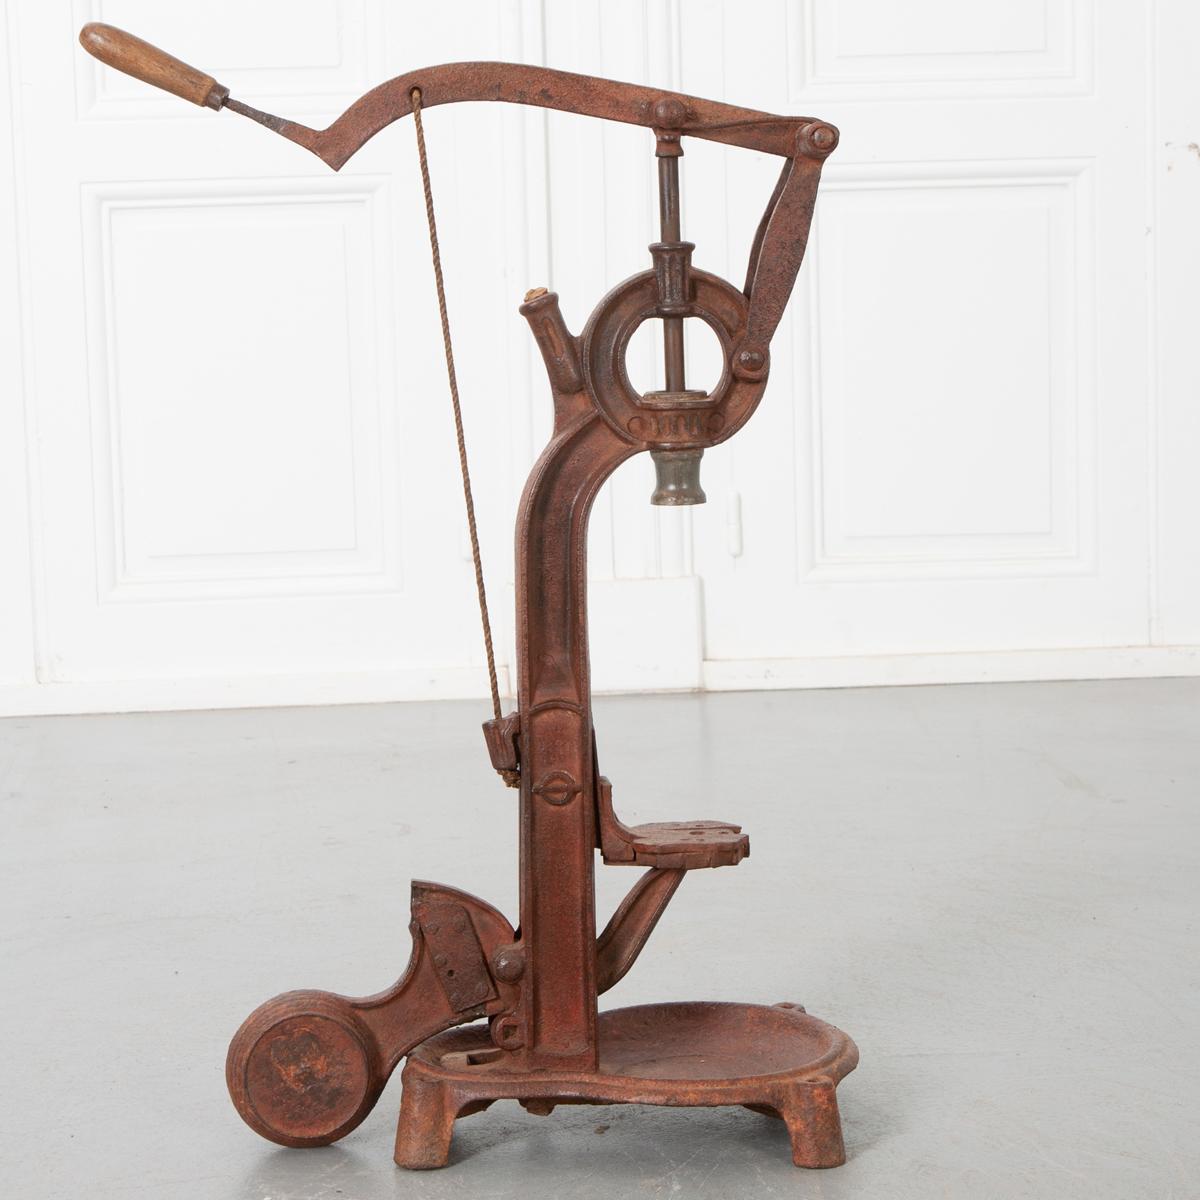 This unique apparatus has a lot to do with the history and shaping of French history and culture: the wine bottle corker. Made of iron around 1890, was used in a winery in Bordeaux. Wine production is intrinsic to French culture and is taken very